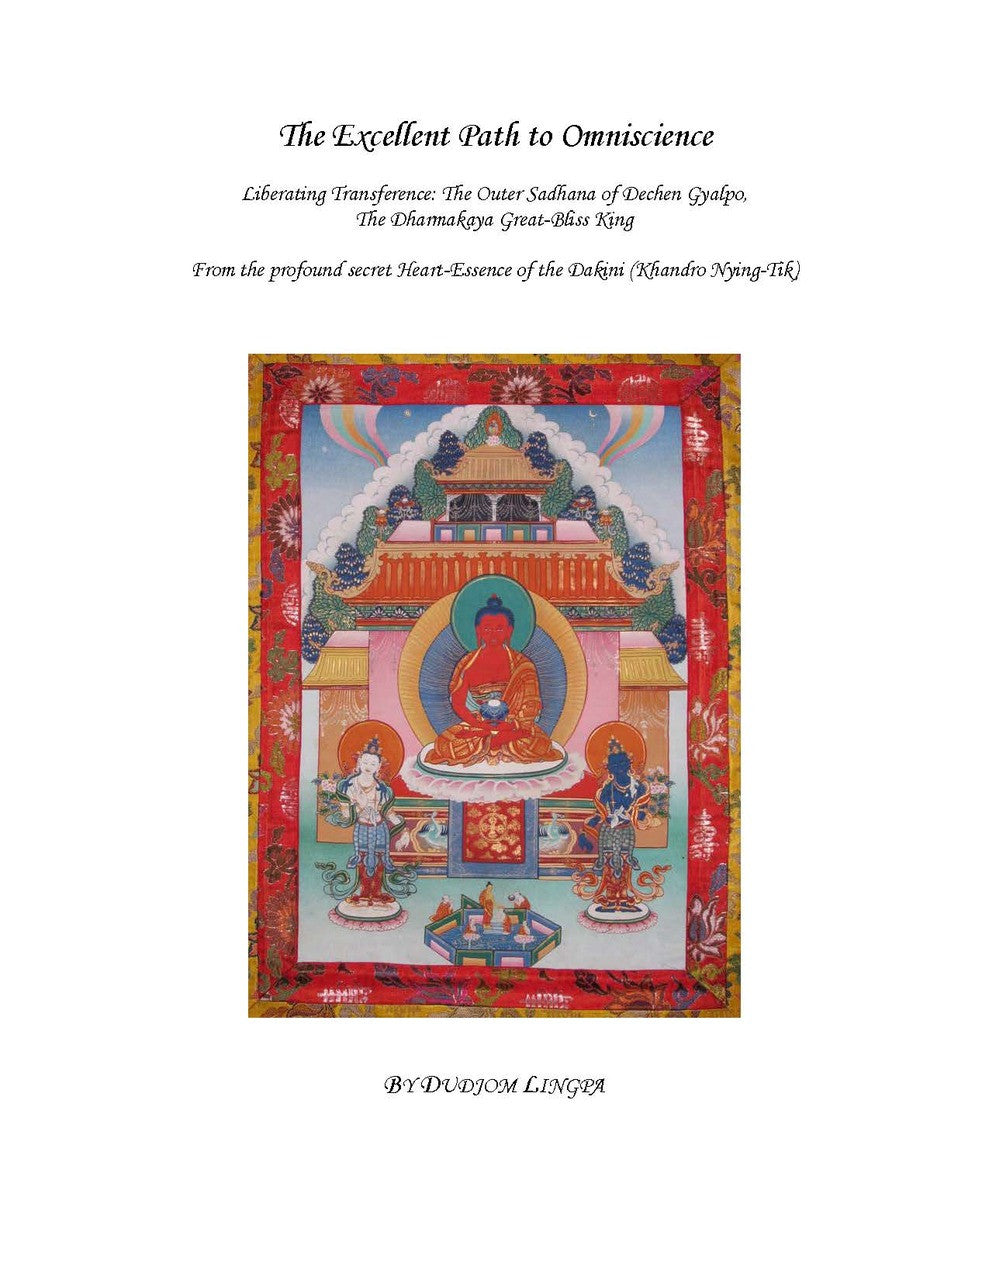 The Excellent Path to Omniscience (Amitabha Zhing Drub)